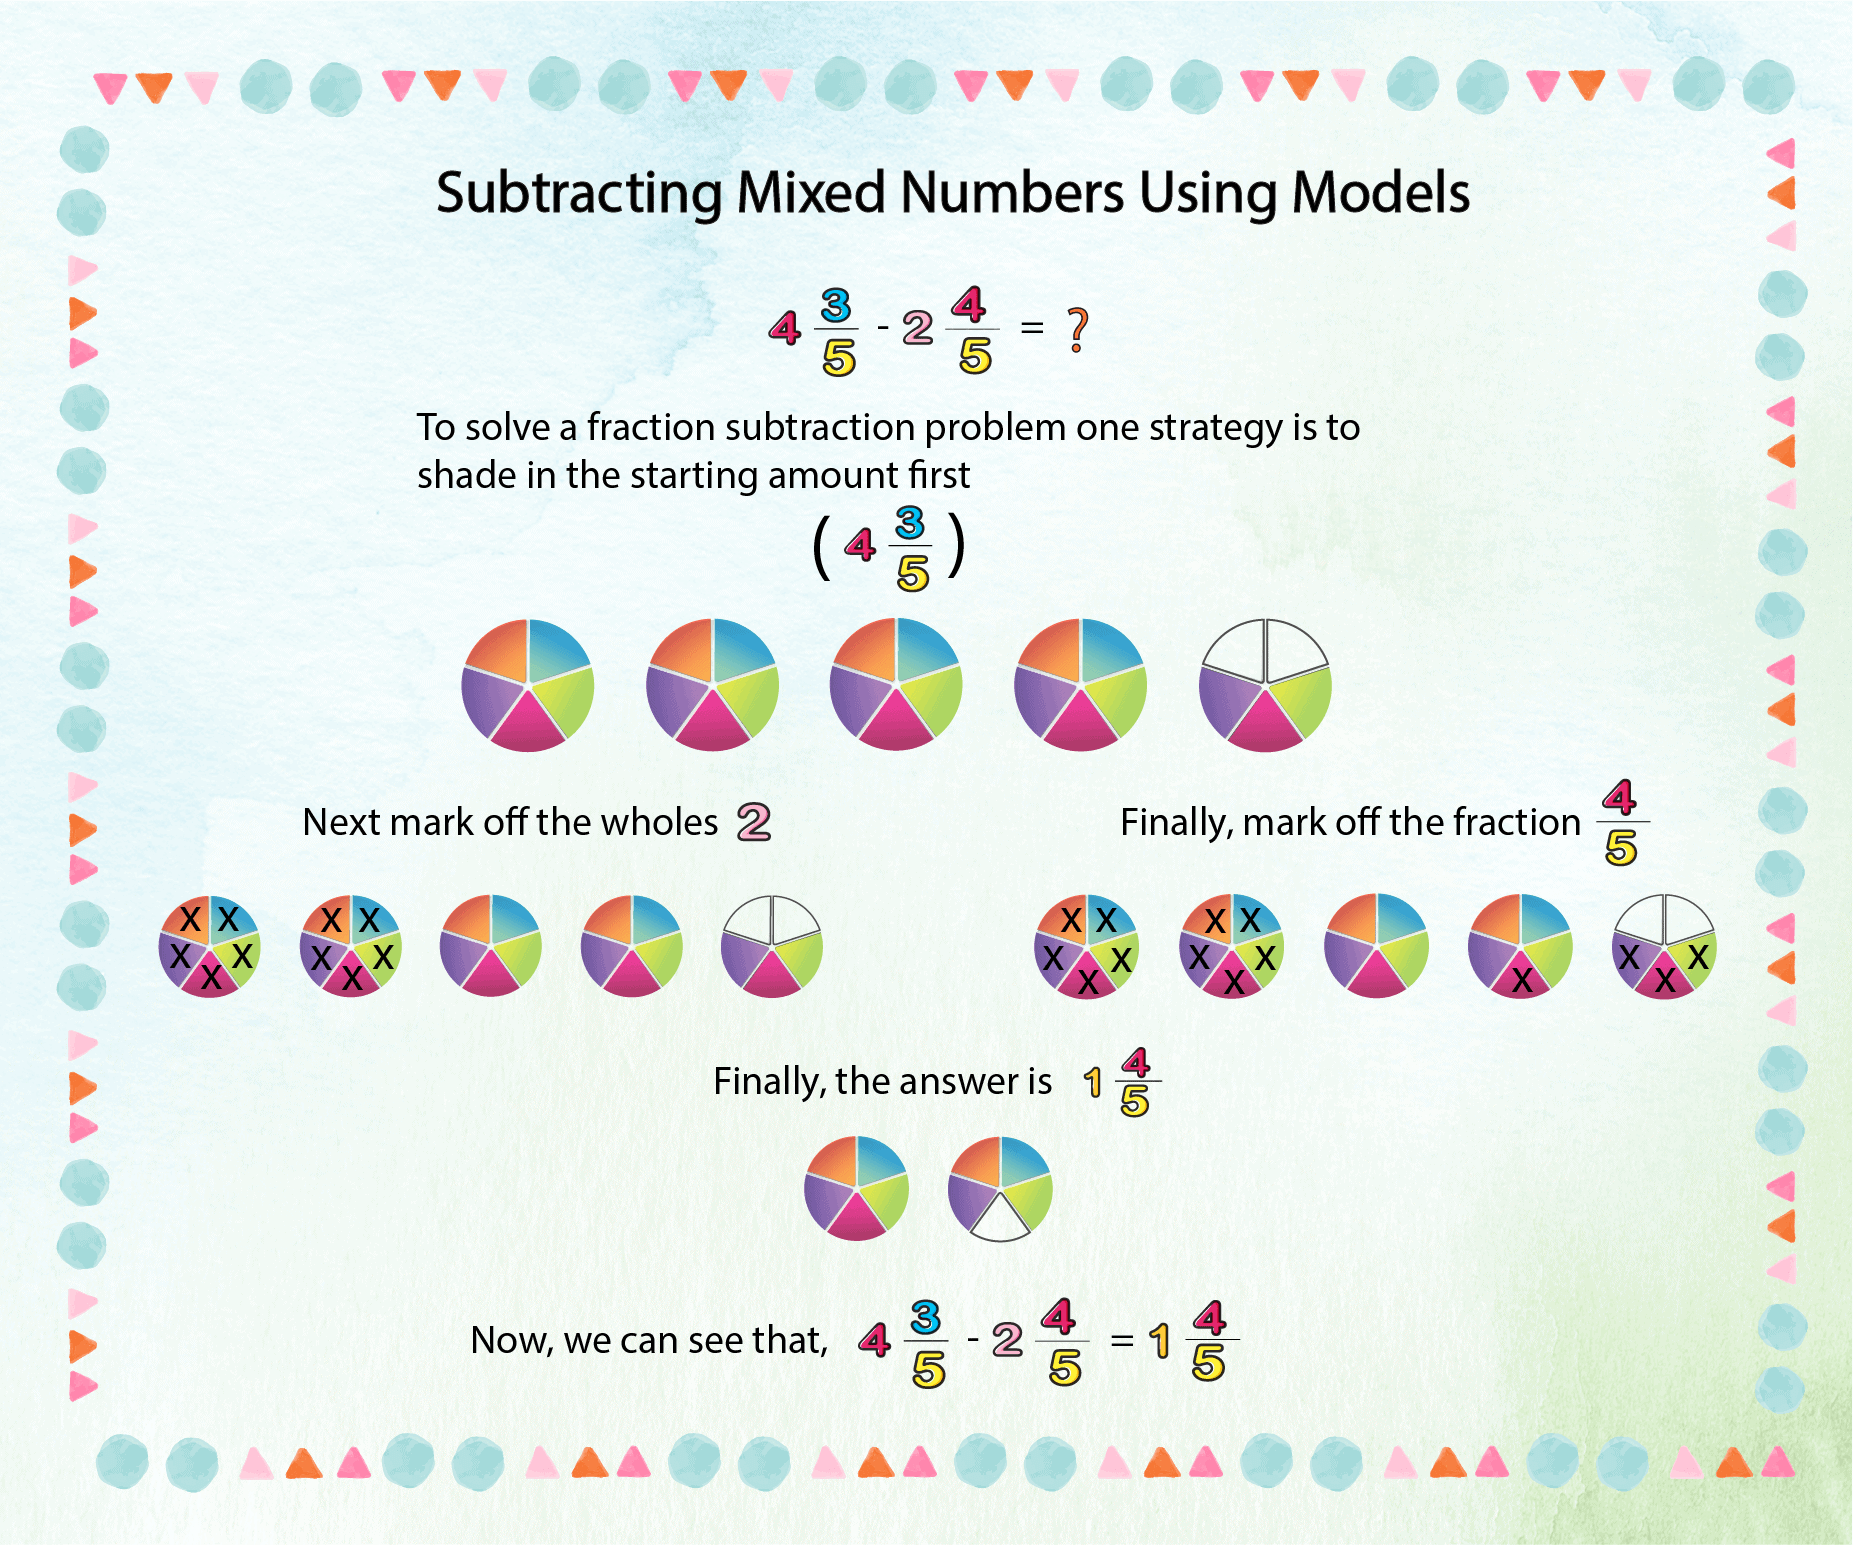 Subtracting Mixed Numbers Using Models